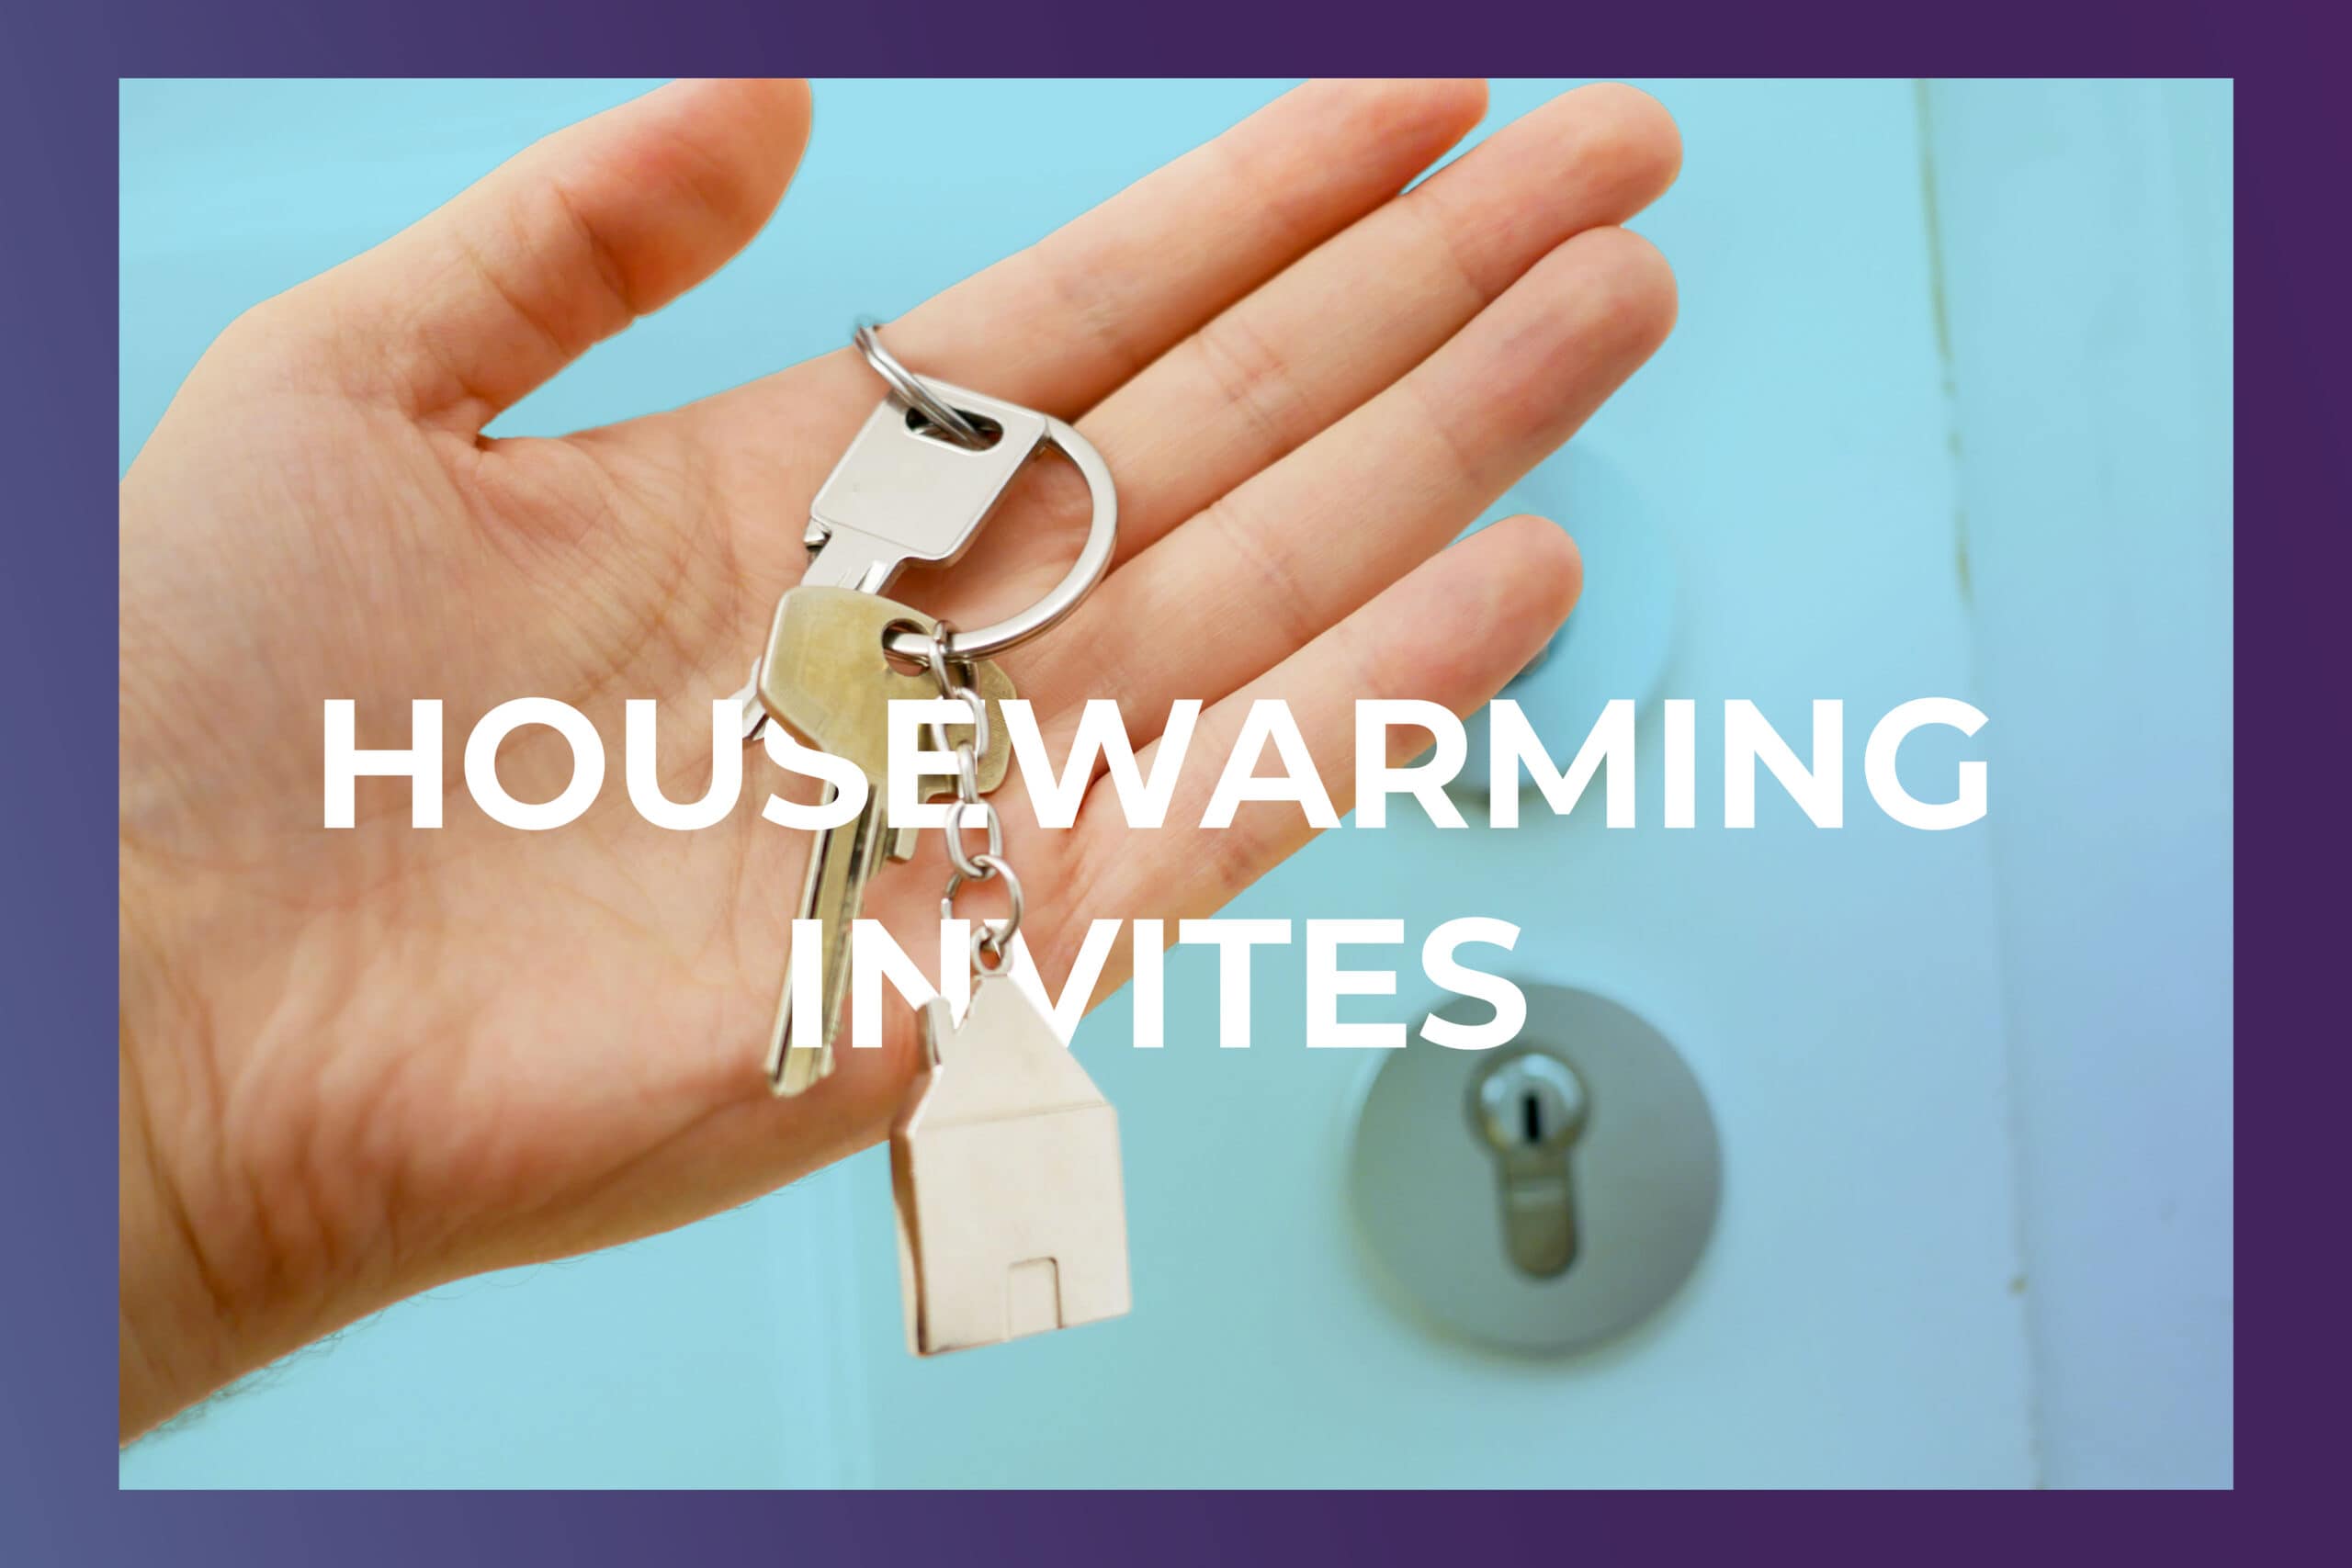 Here's what to include when sending housewarming invitations